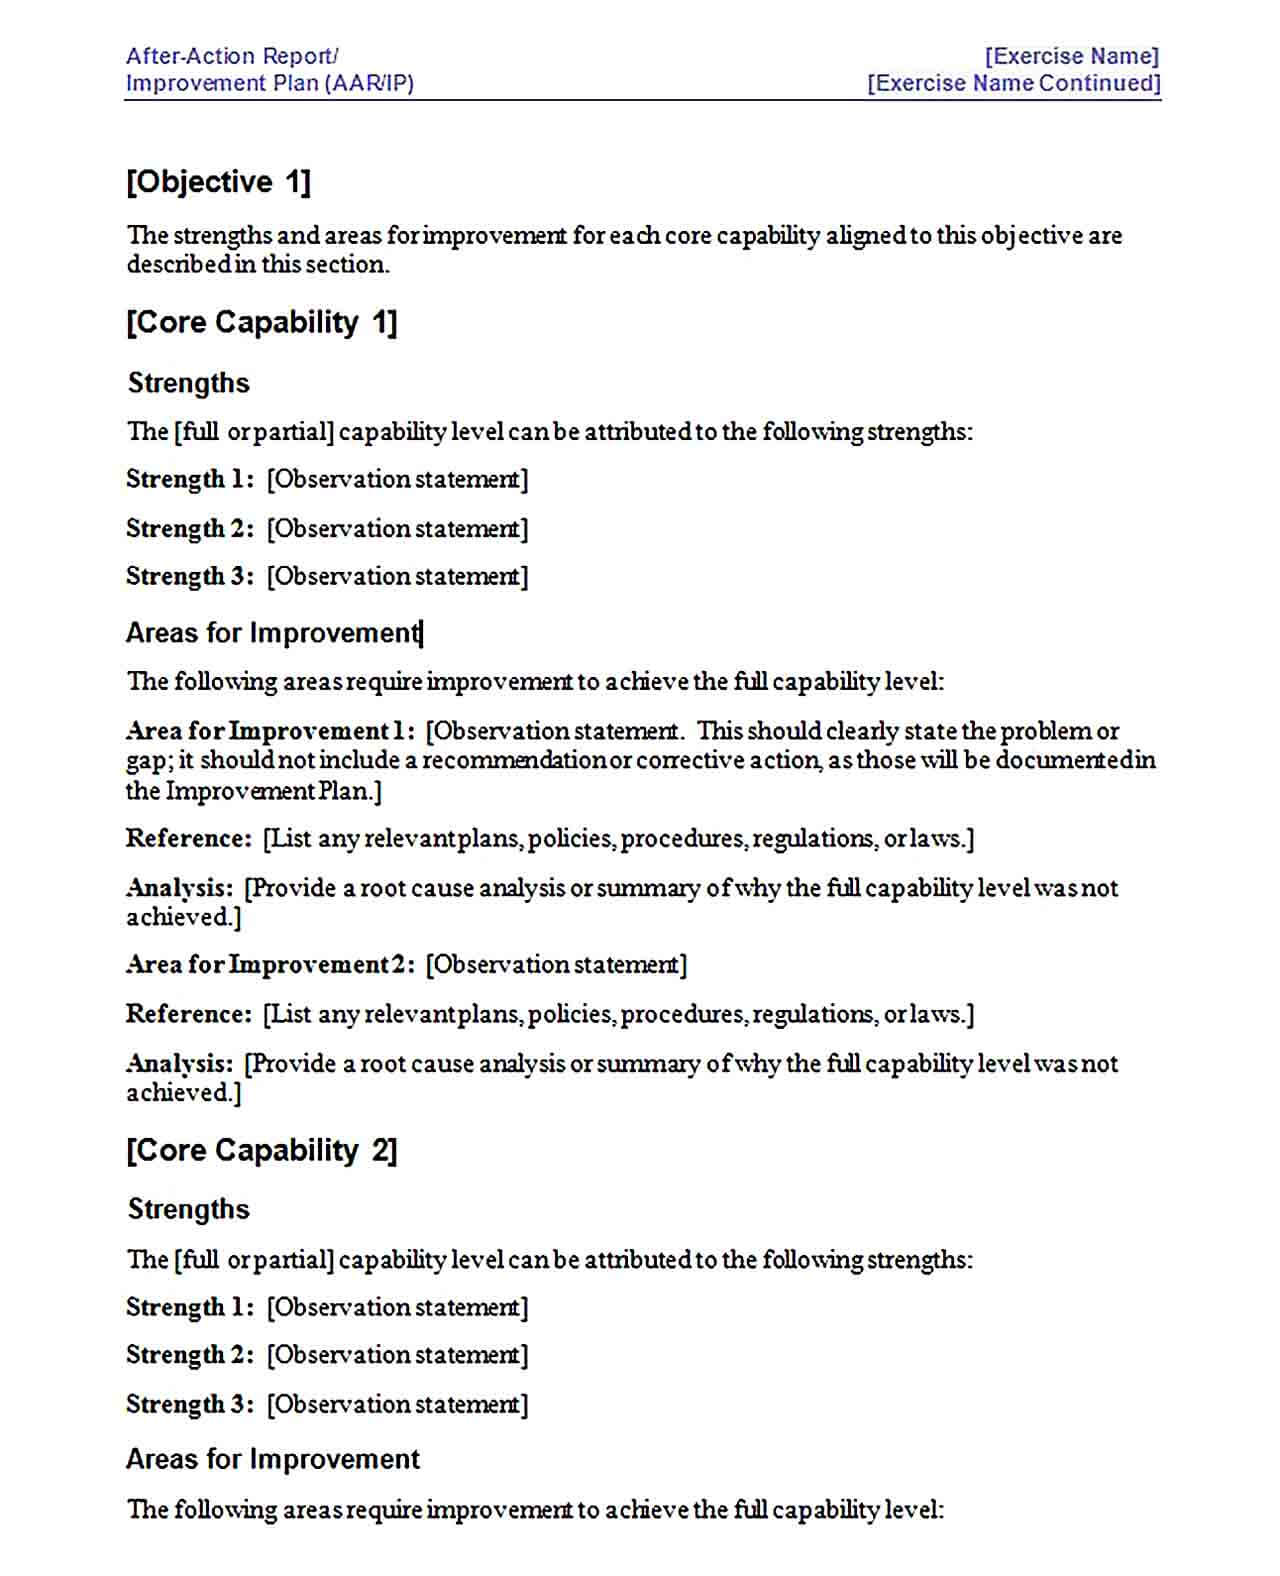 Sample After Action Report Improvement Plan Template 1